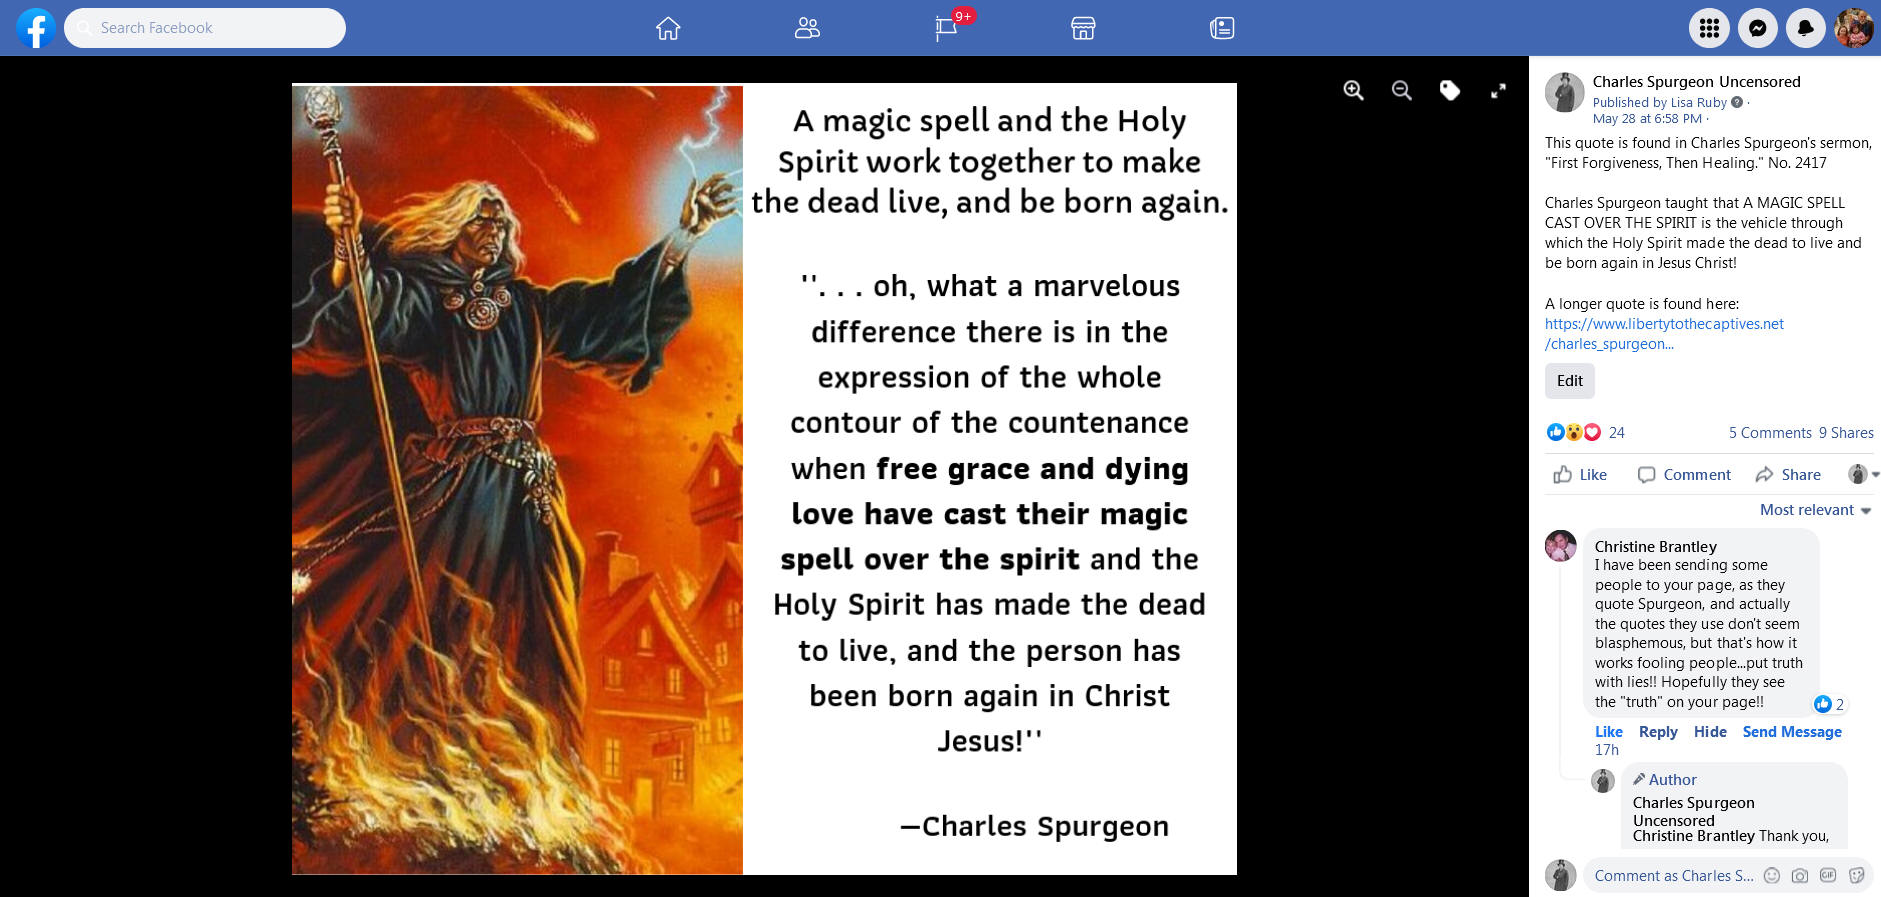 Charles Spurgeon: Free Grace and Dying Love Cast Magic Spell Over the Spirit 